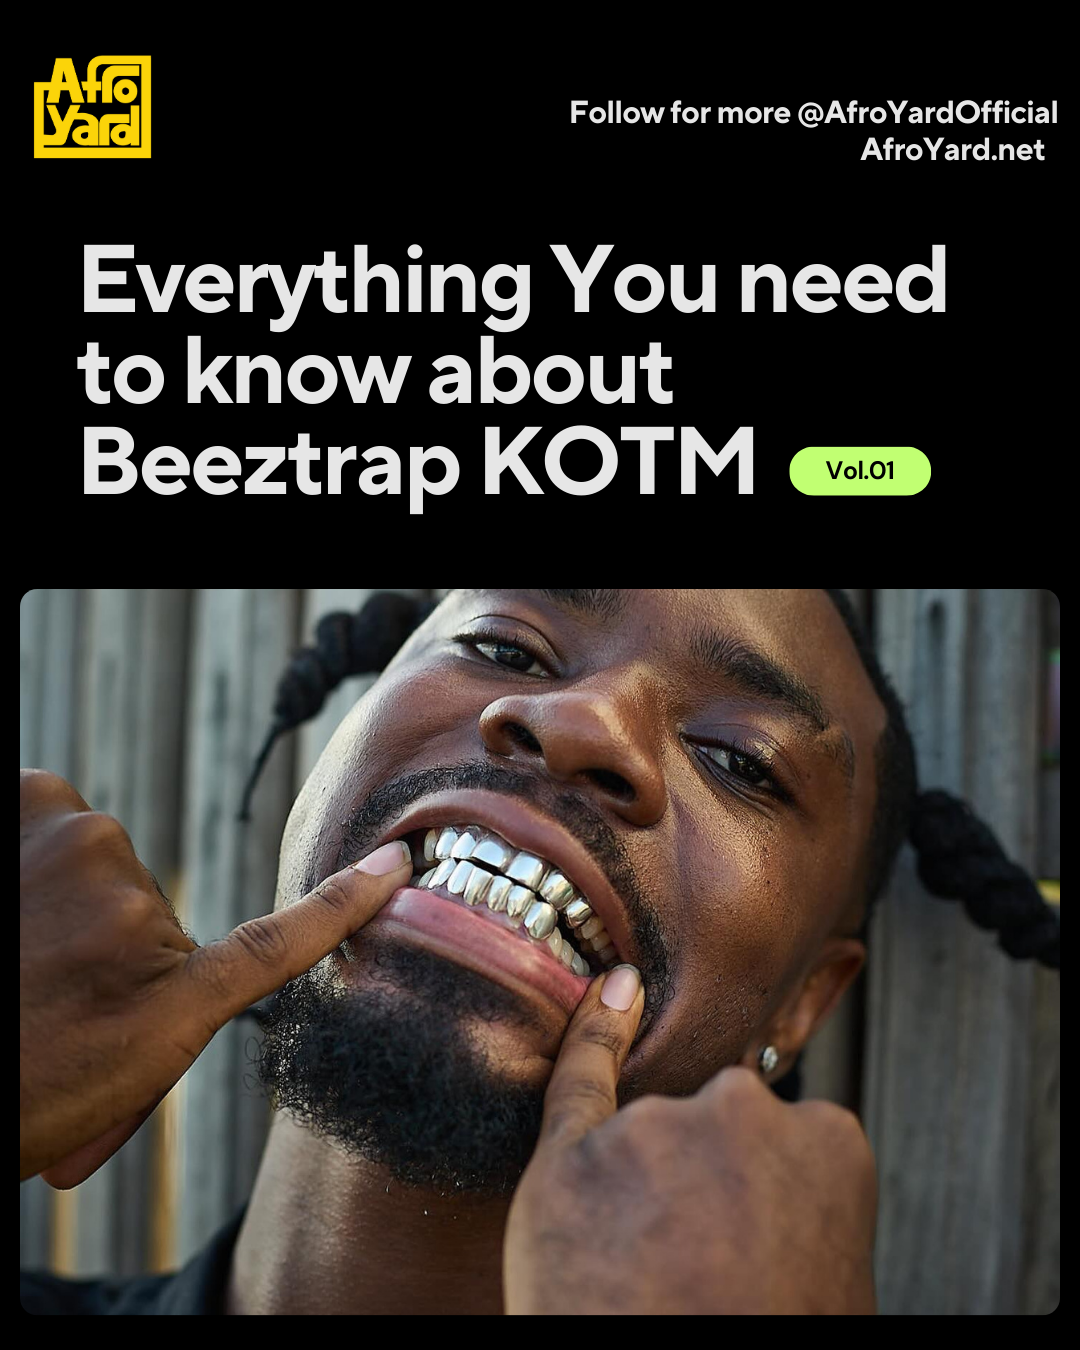 Everything You need to know about Beeztrap KOTM